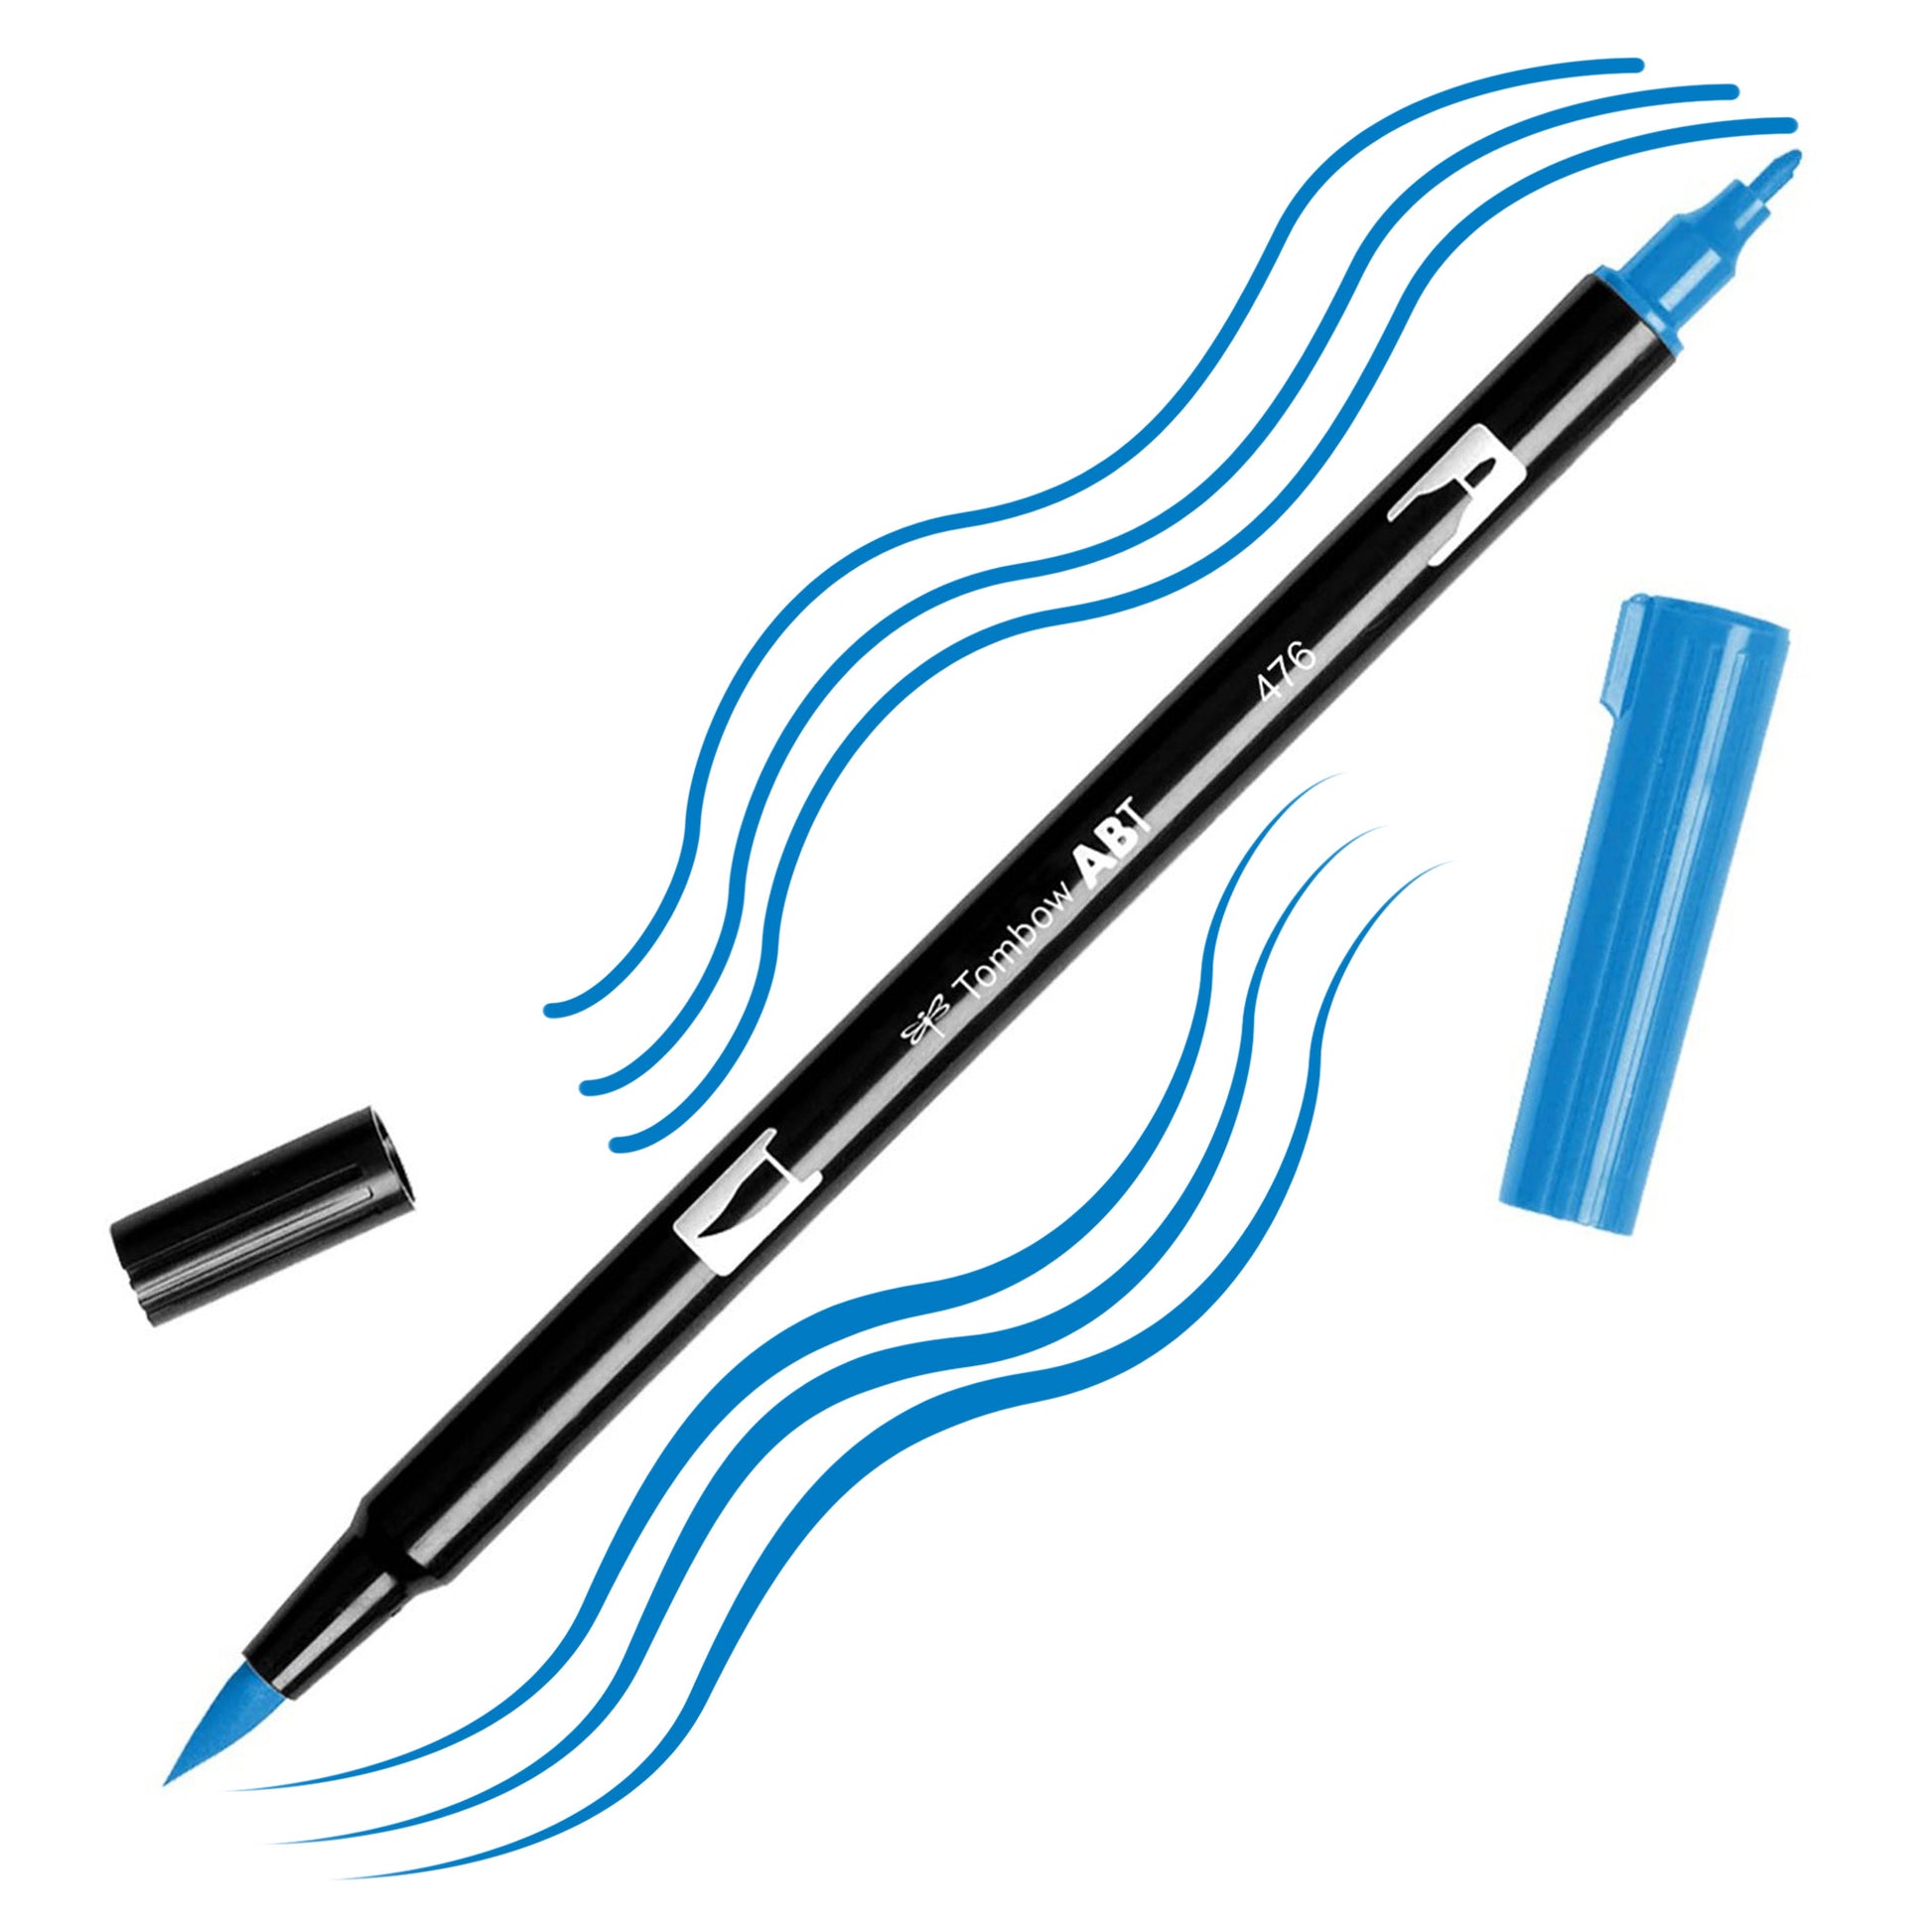 Cyan Tombow double-headed brush-pen with a flexible nylon fiber brush tip and a fine tip against a white background with Cyan strokes